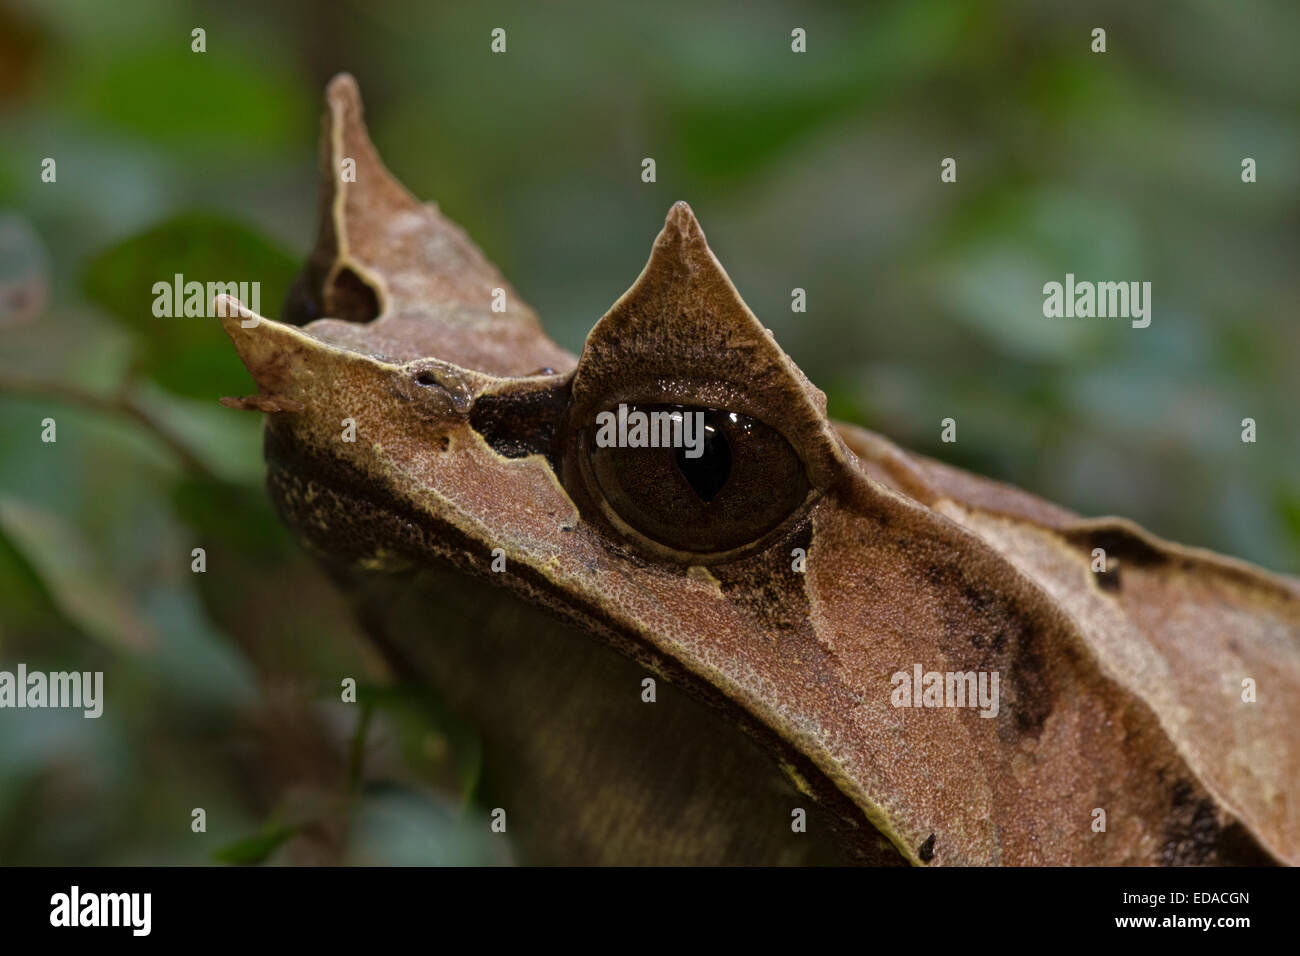 long-nosed horned frog (Megophrys nasuta), also known as the Malayan horned frog or Malayan leaf frog, captive Stock Photo